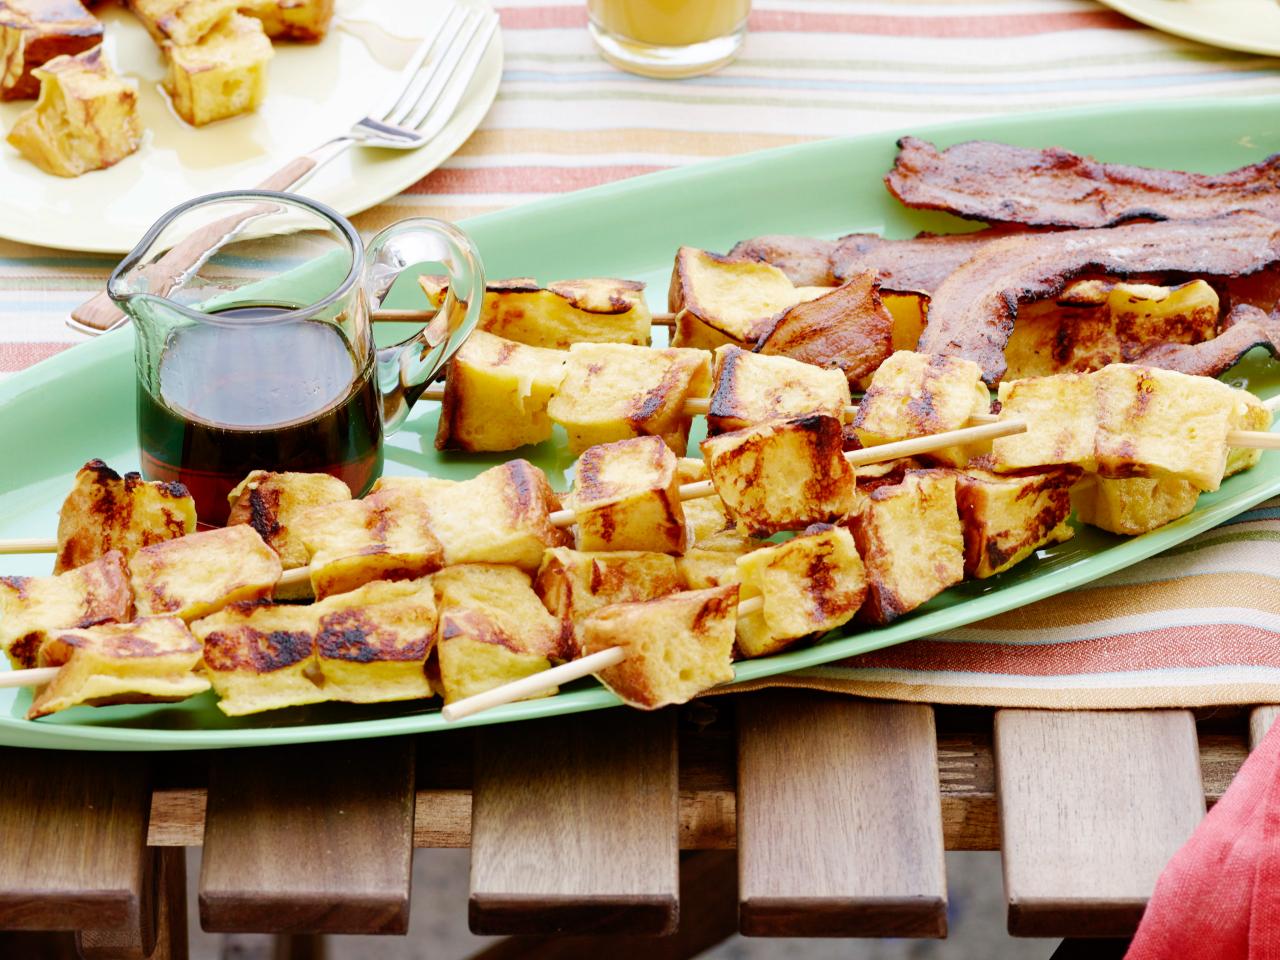 Grill Great Breakfast this Holiday - Grate Recipe